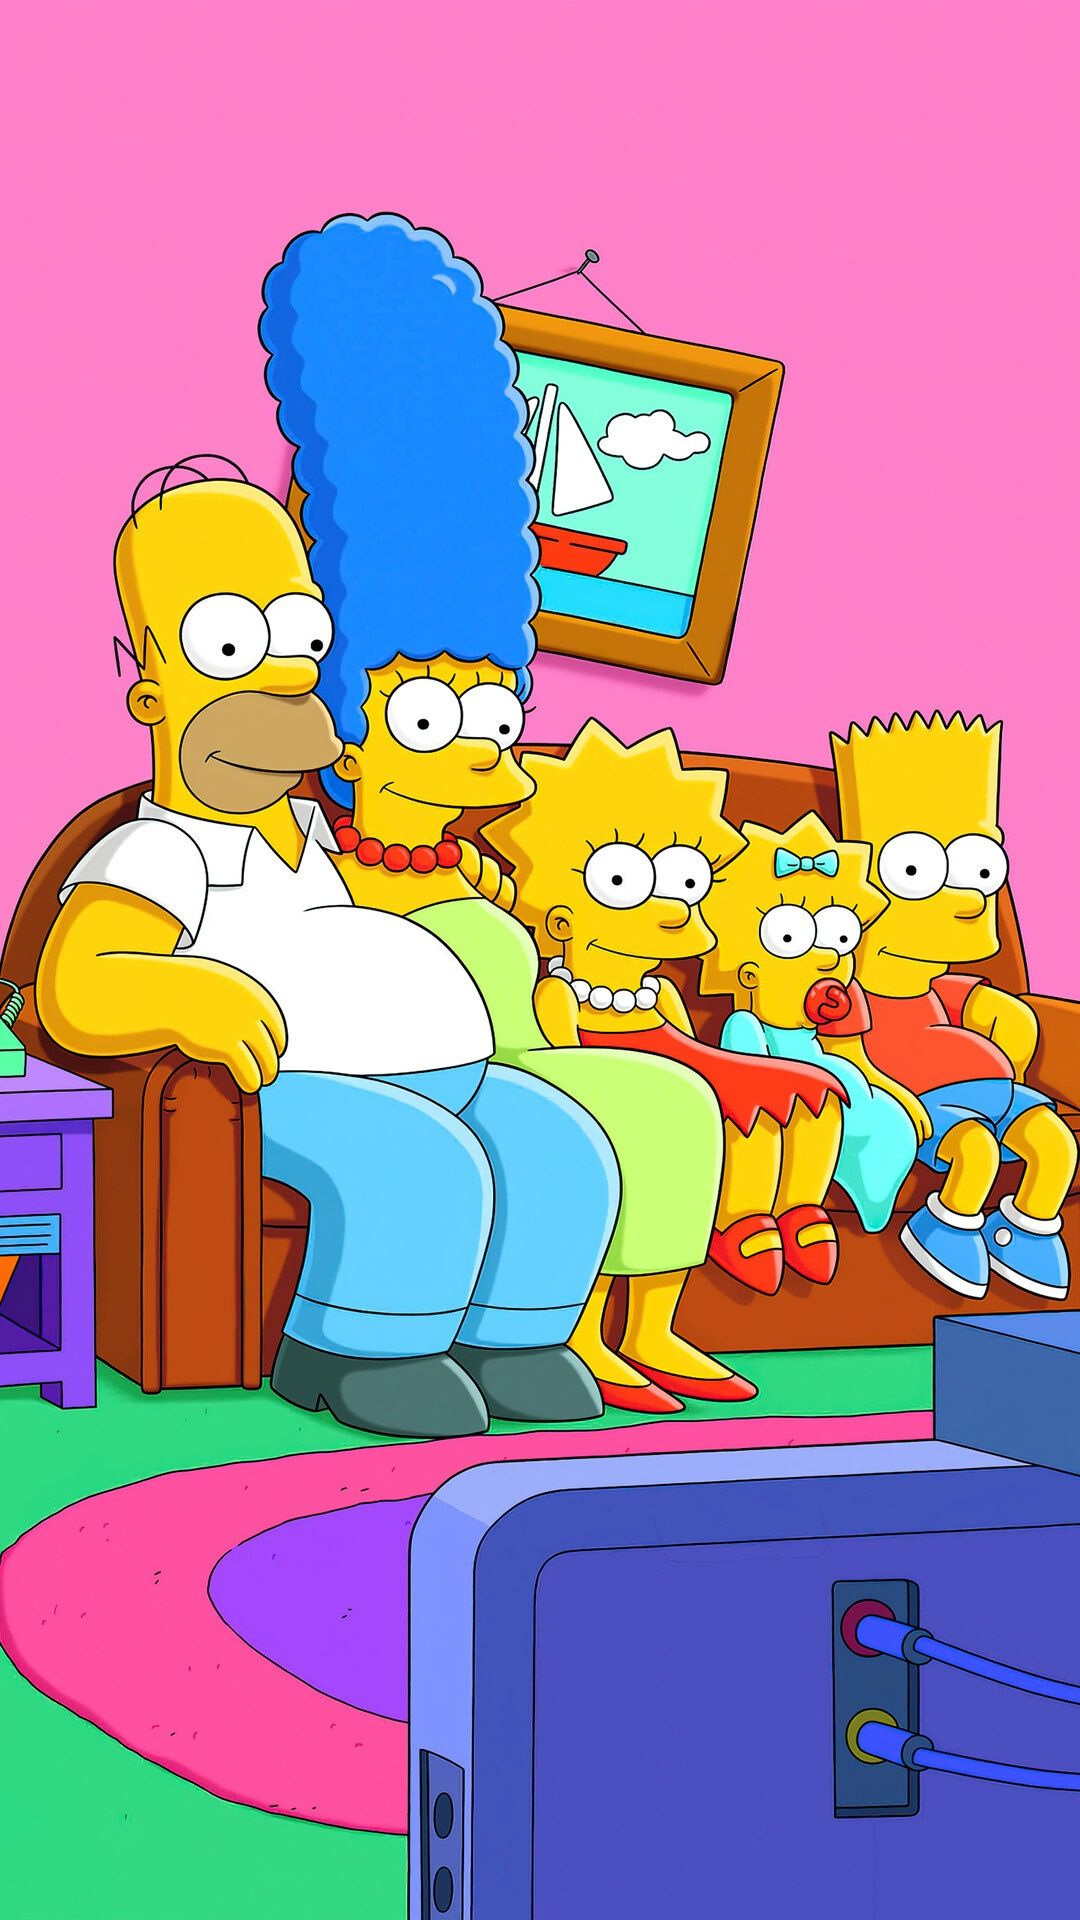 The Simpsons family watching TV on the couch - The Simpsons